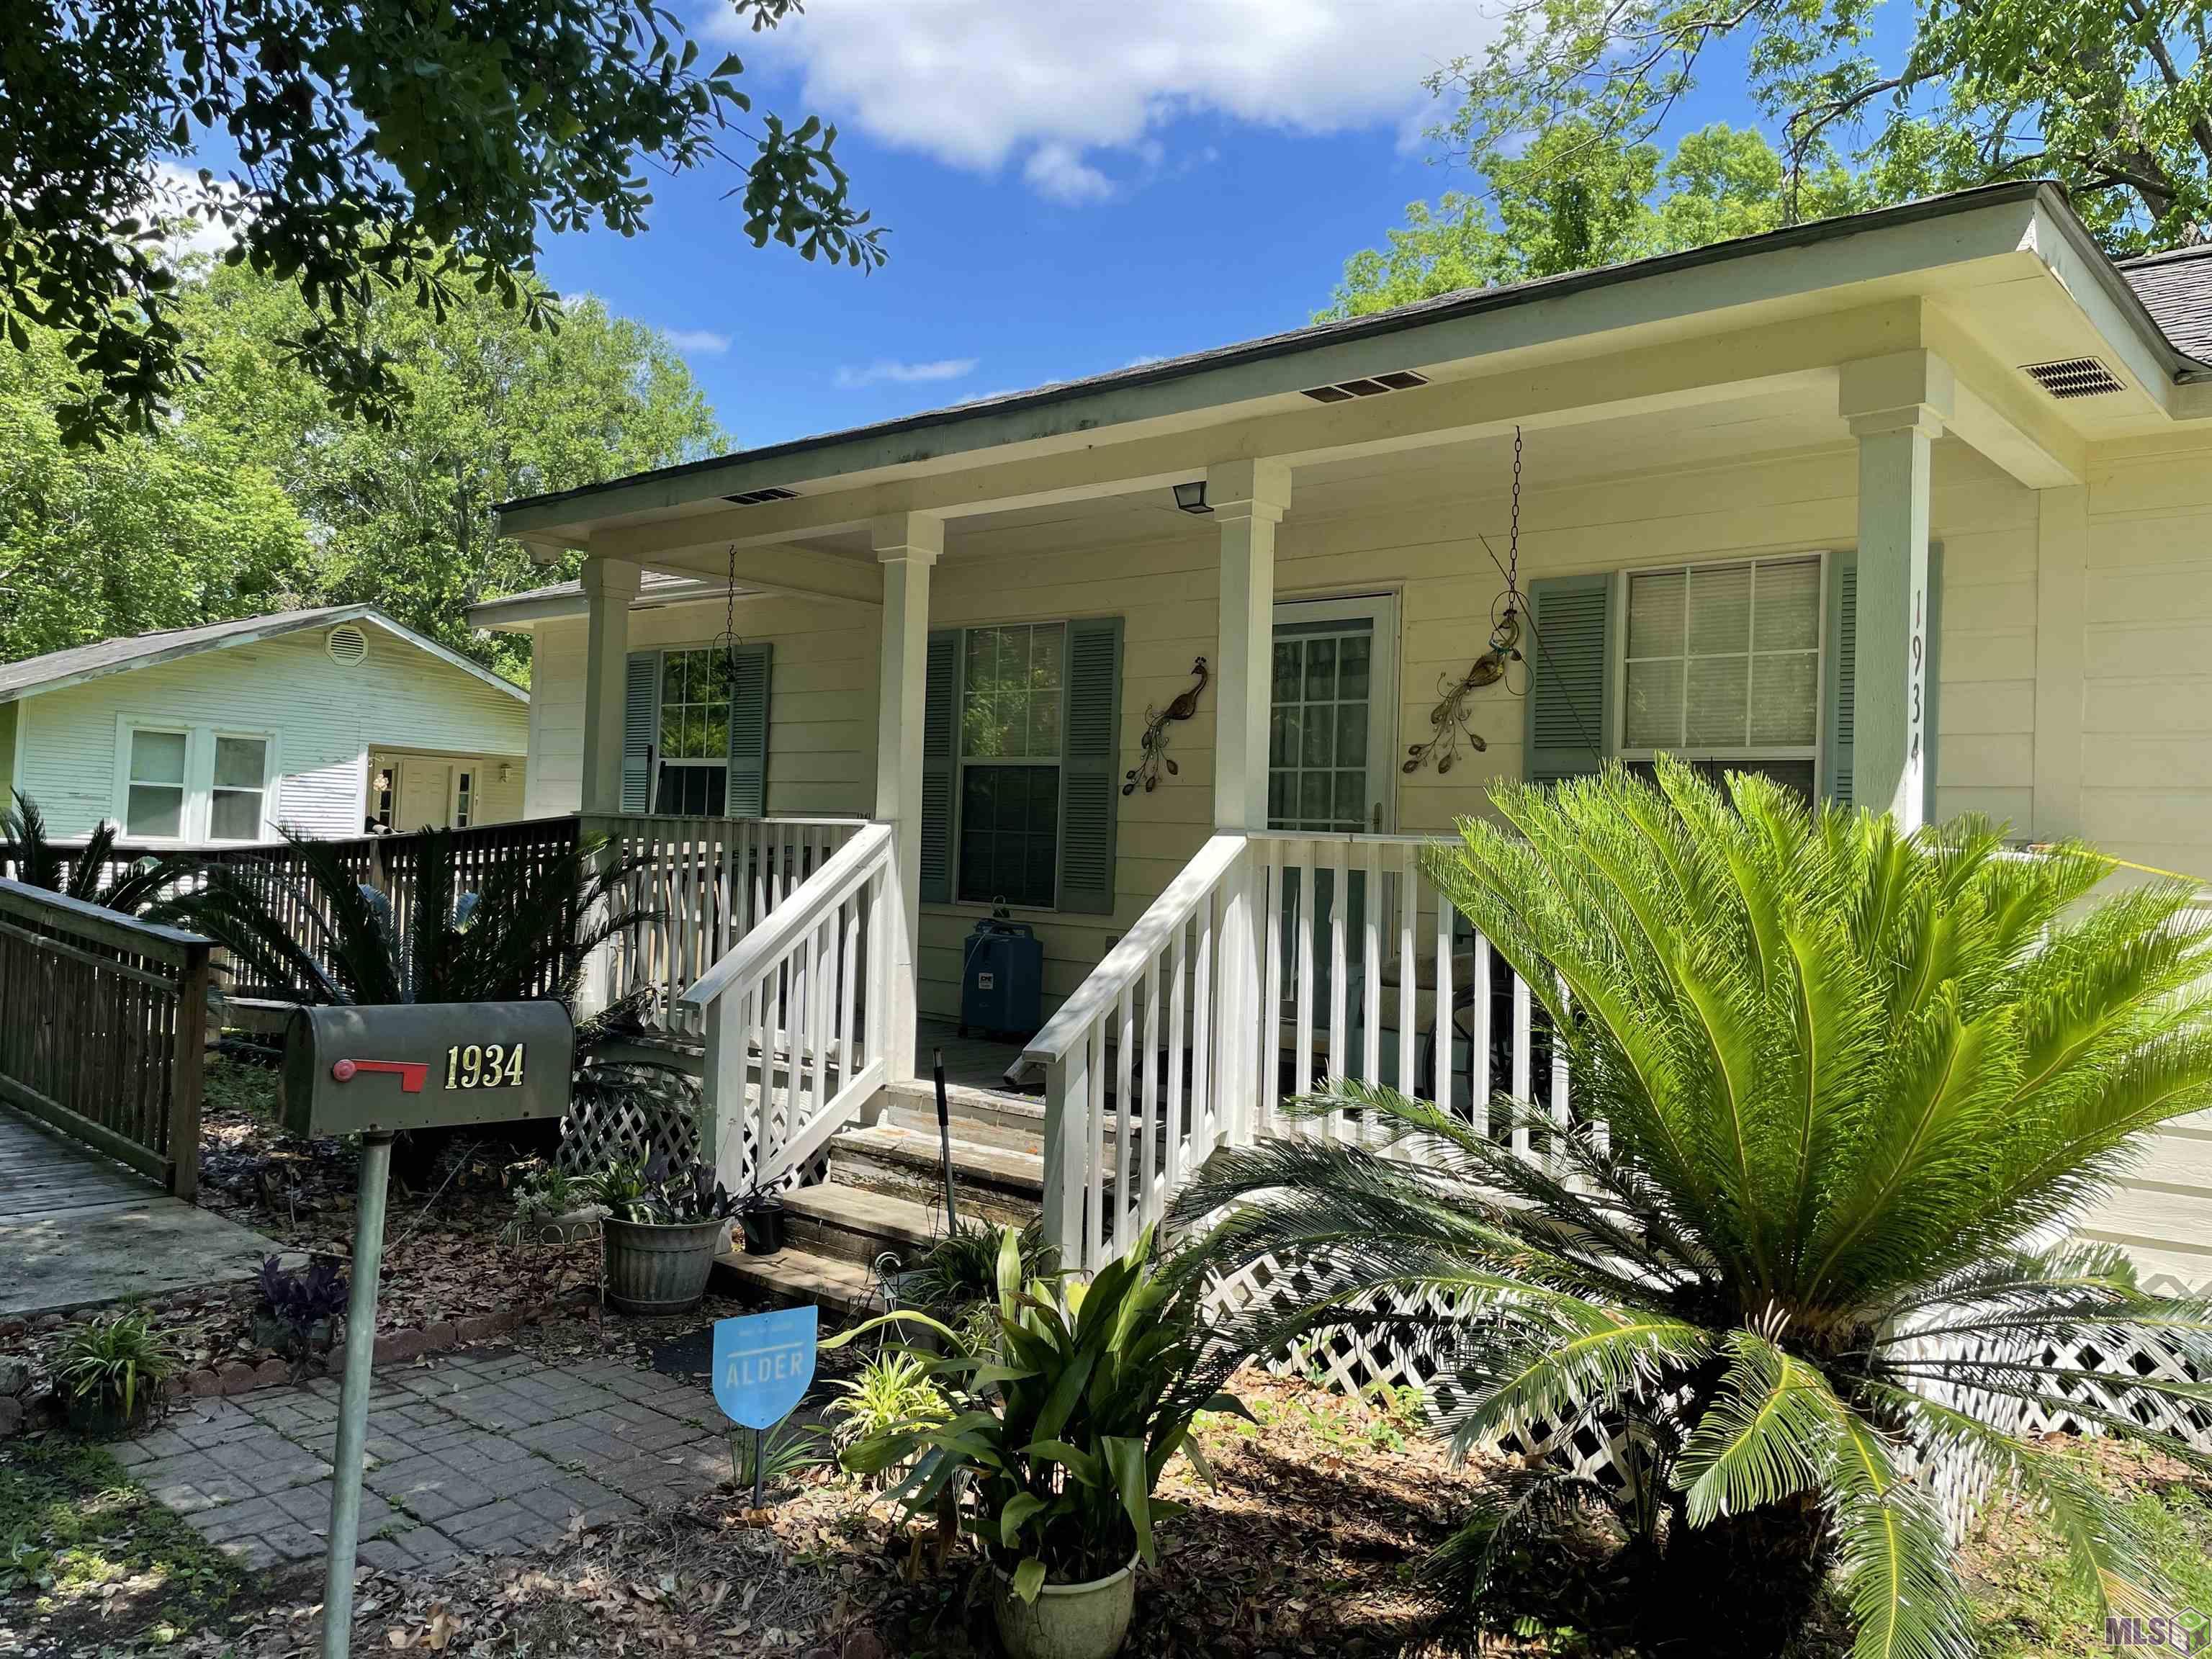 No need to look any further!!! This charming 3 bed and 2 bath is located in the heart of Gonzales and awaits new owners.  Home has no carpet and features a open floorplan.  Fridge, washer and dryer remain with the sale of the home. Home is located in flood zone x (no flood insurance required) and has never flooded.